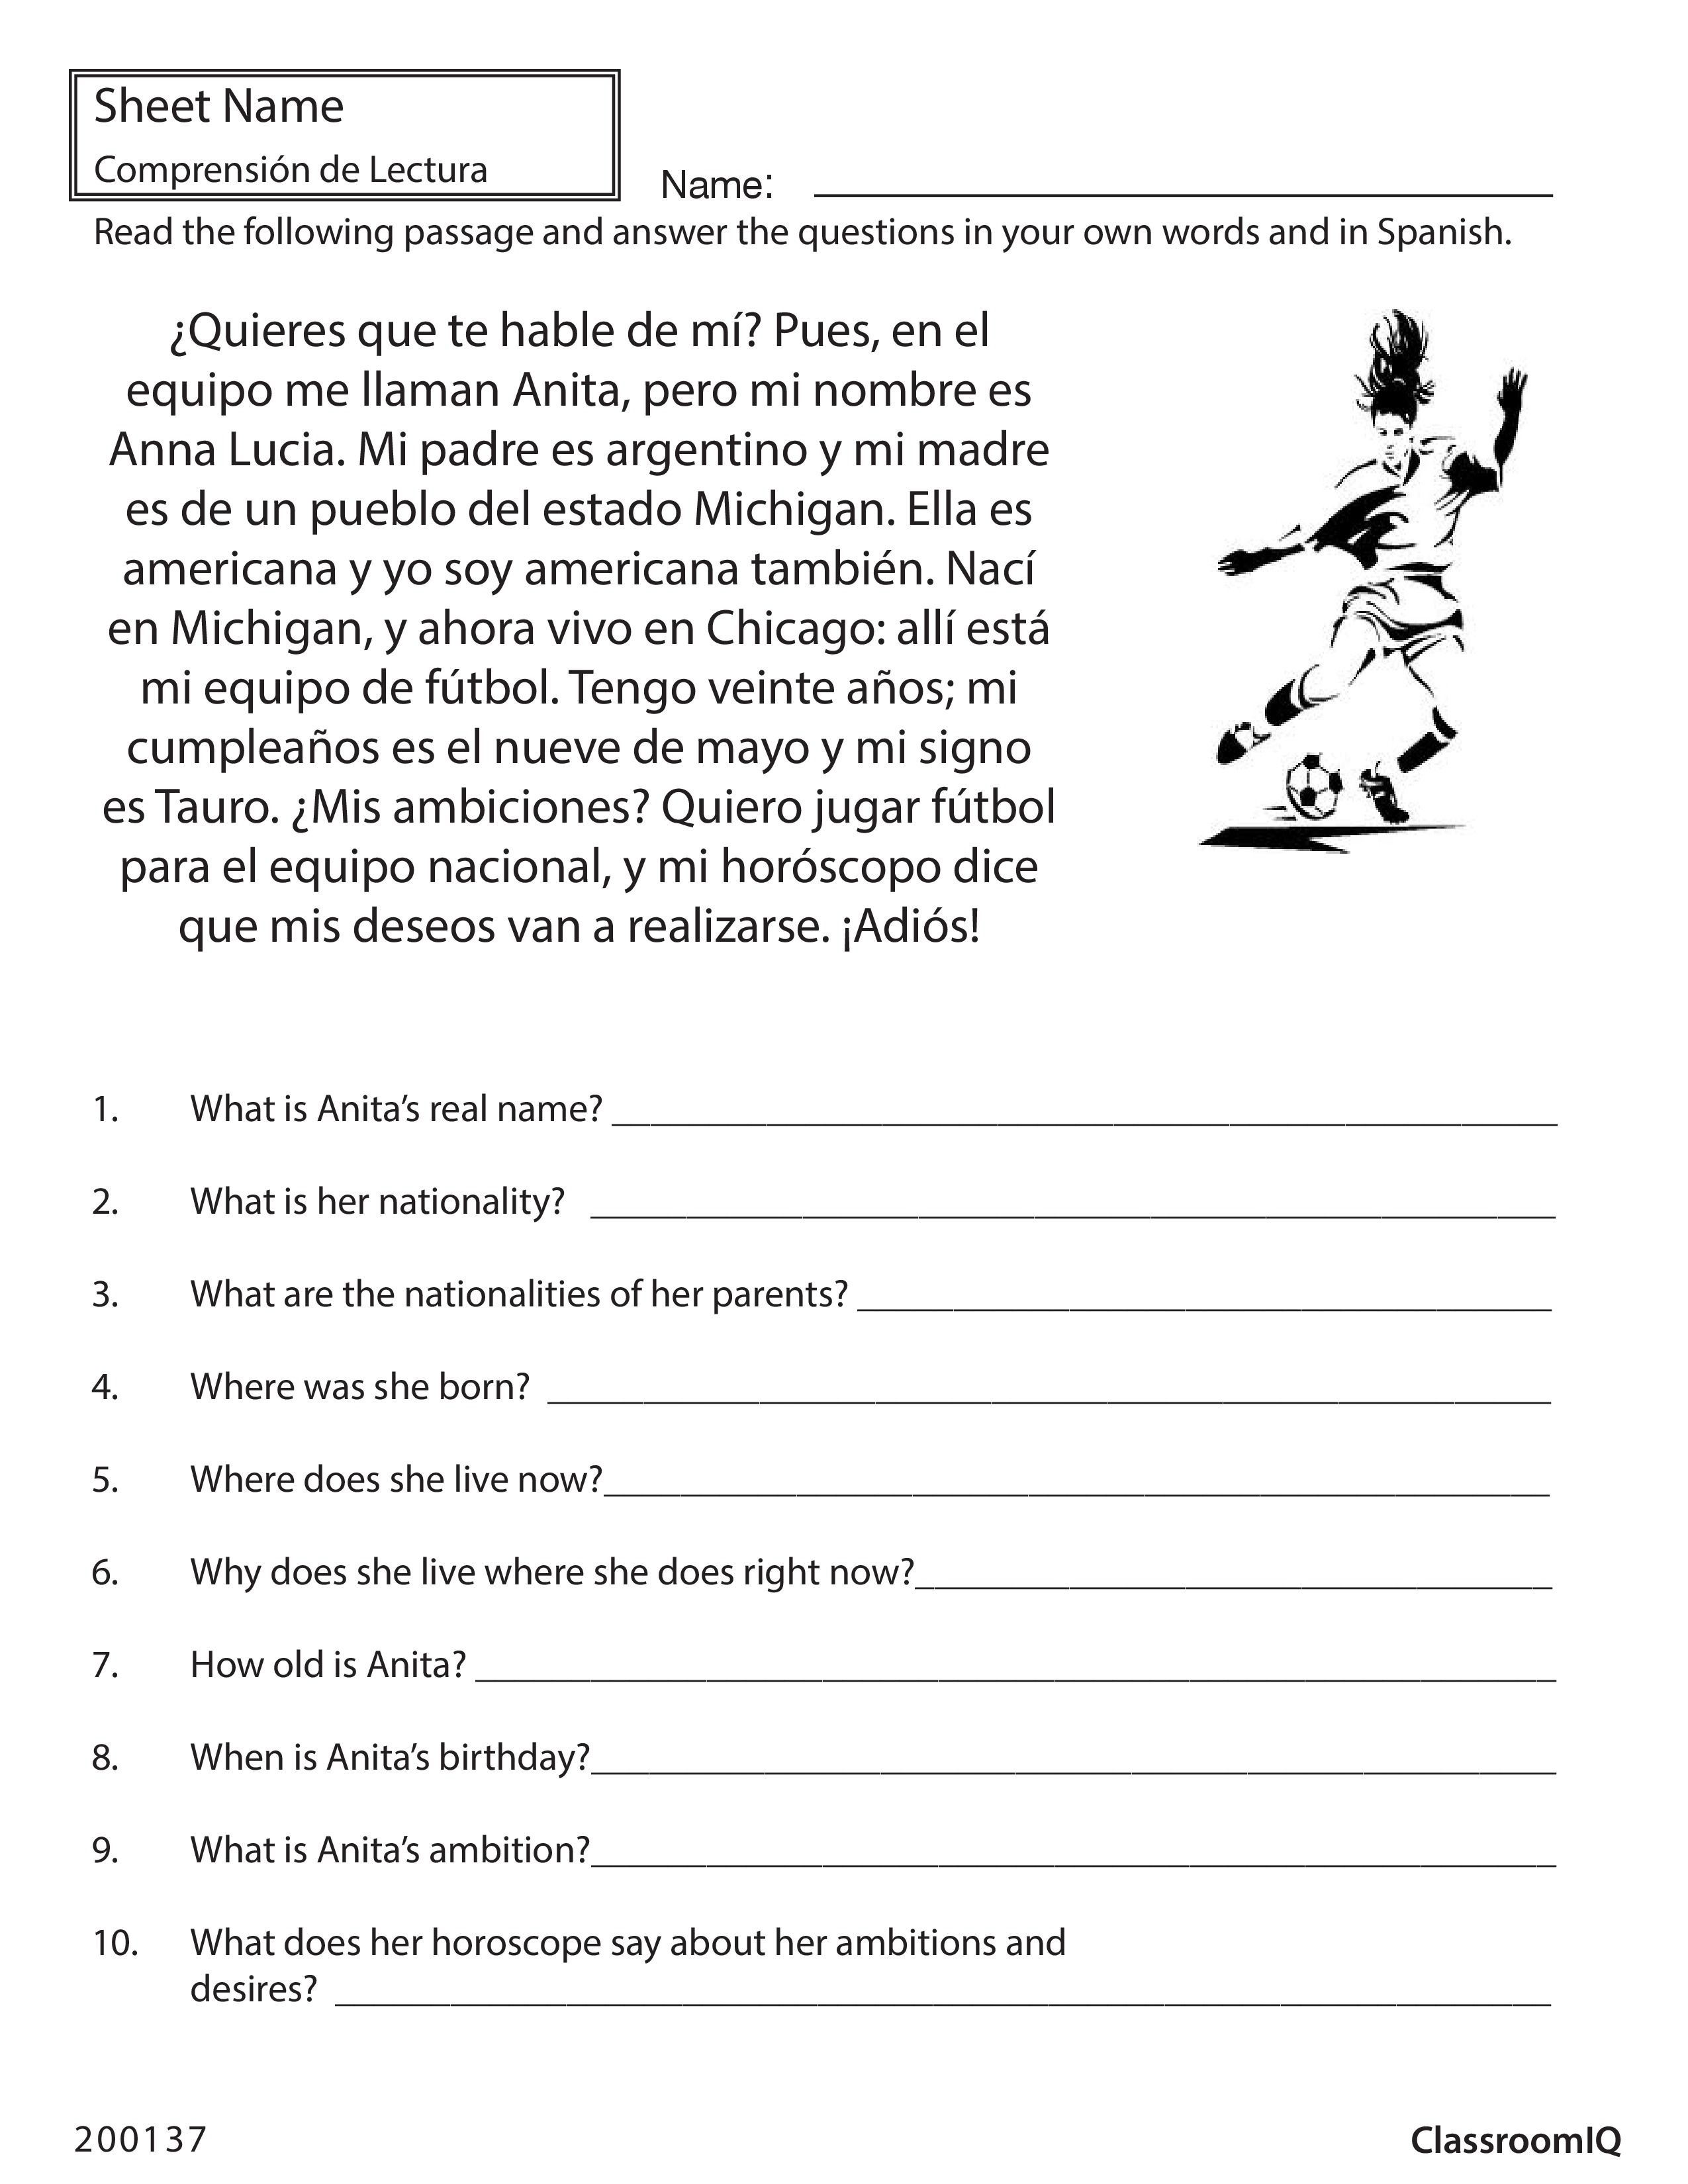 Read Spanish Passage And Answer Questions In English - Free Printable Spanish Reading Comprehension Worksheets